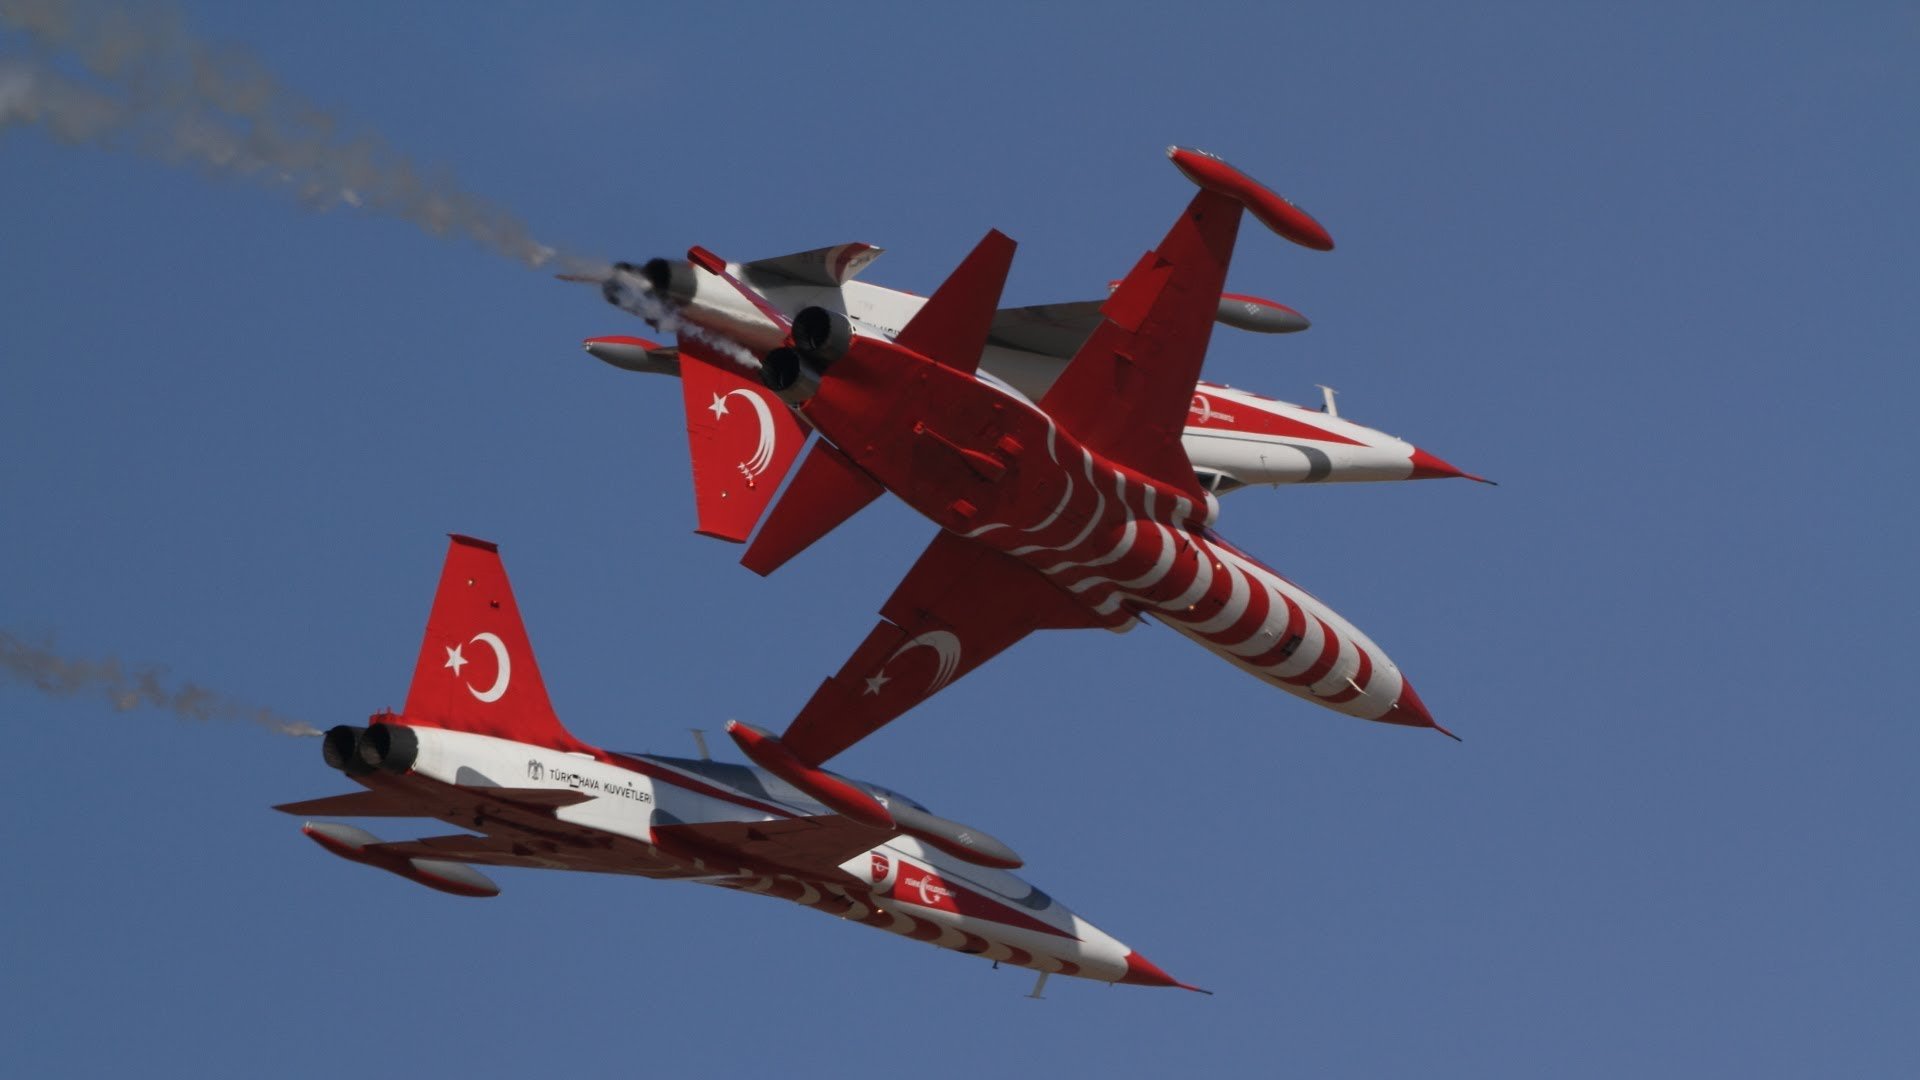 acrobatic, Air, Aircrafts, Turkish, Stars, Team, Northrop, F Freedom, Fighter Wallpaper HD / Desktop and Mobile Background